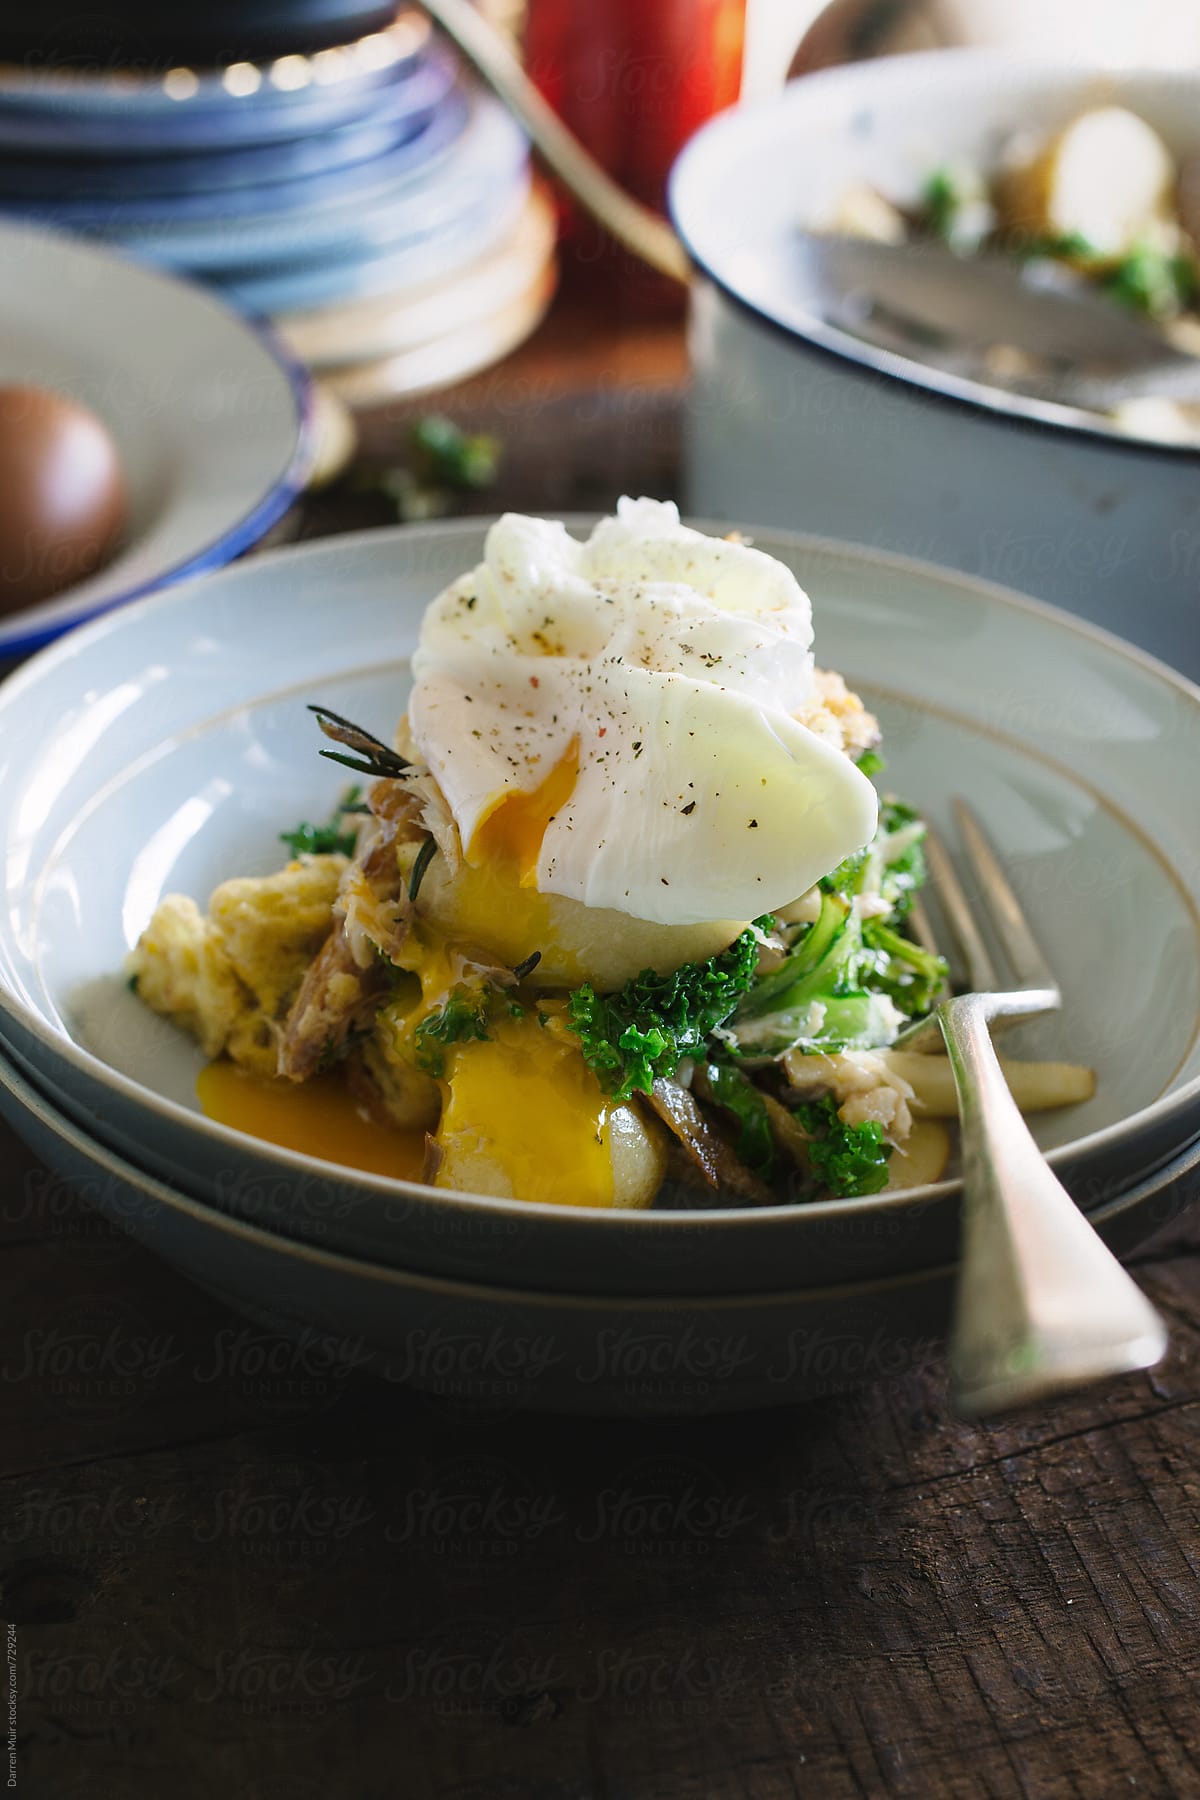 Smoked mackerel and kale salad with a poached egg.